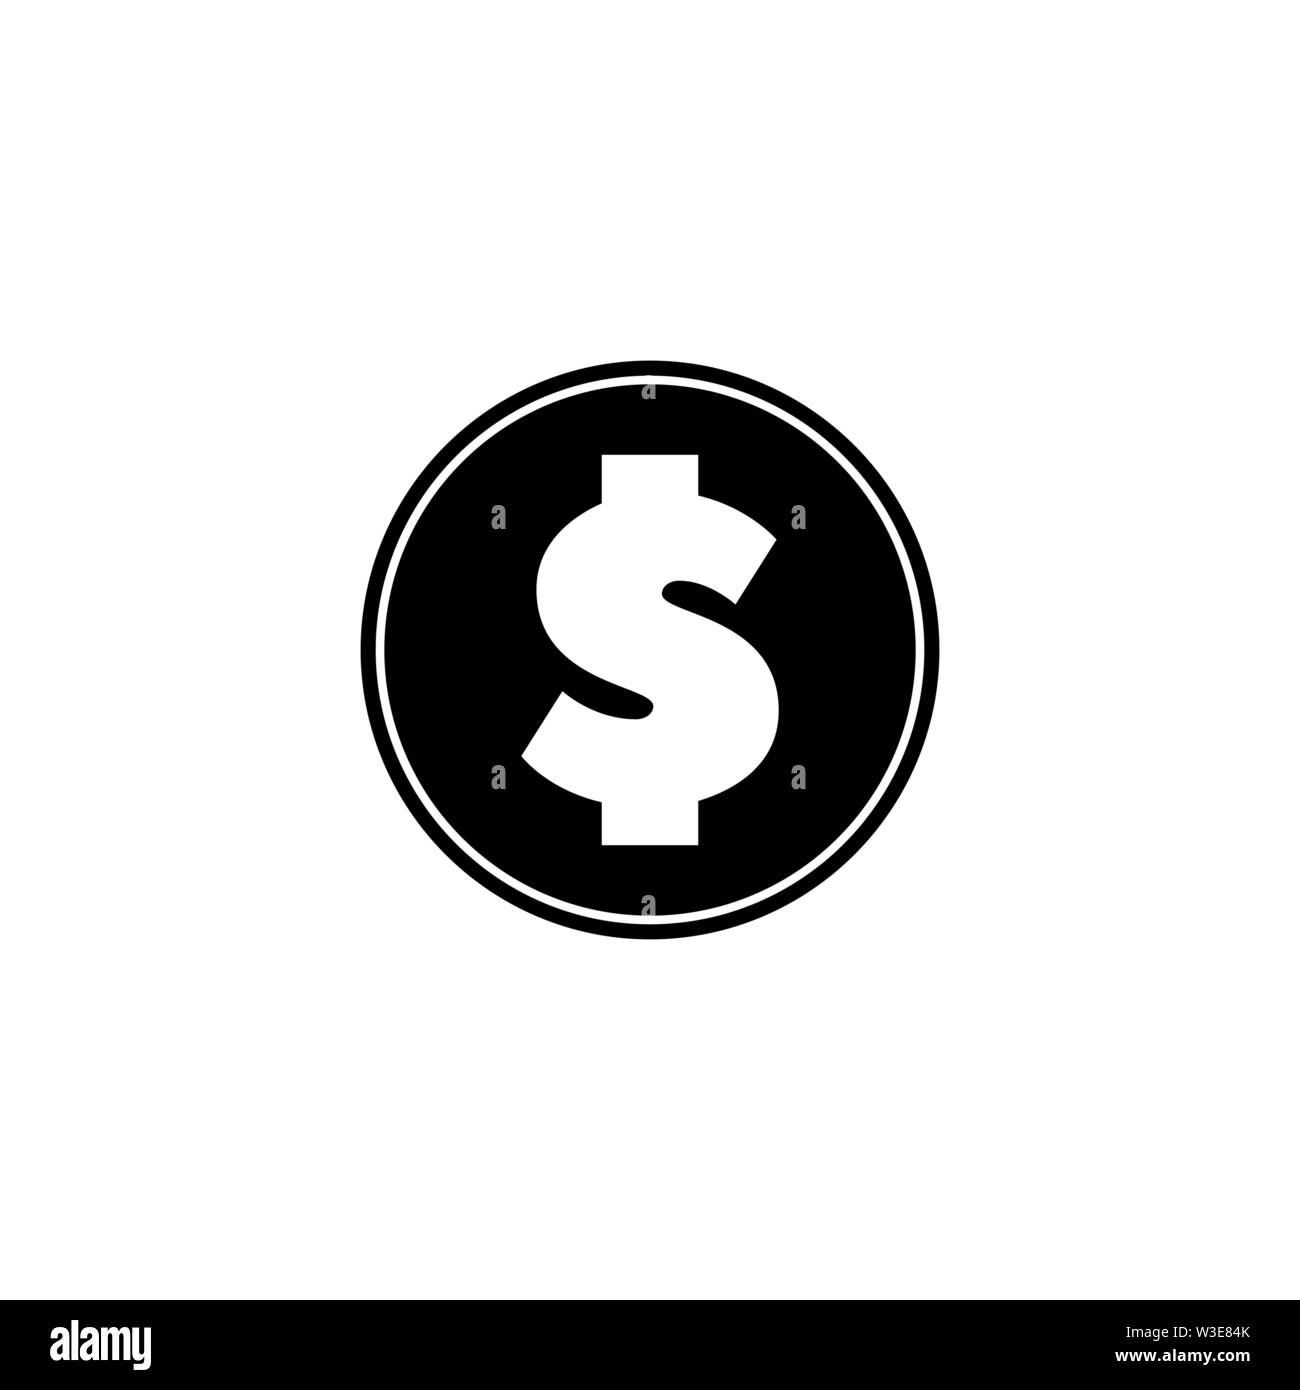 Dollar Coin. Flat Vector Icon illustration. Simple black symbol on white background. Dollar Coin sign design template for web and mobile UI element Stock Vector